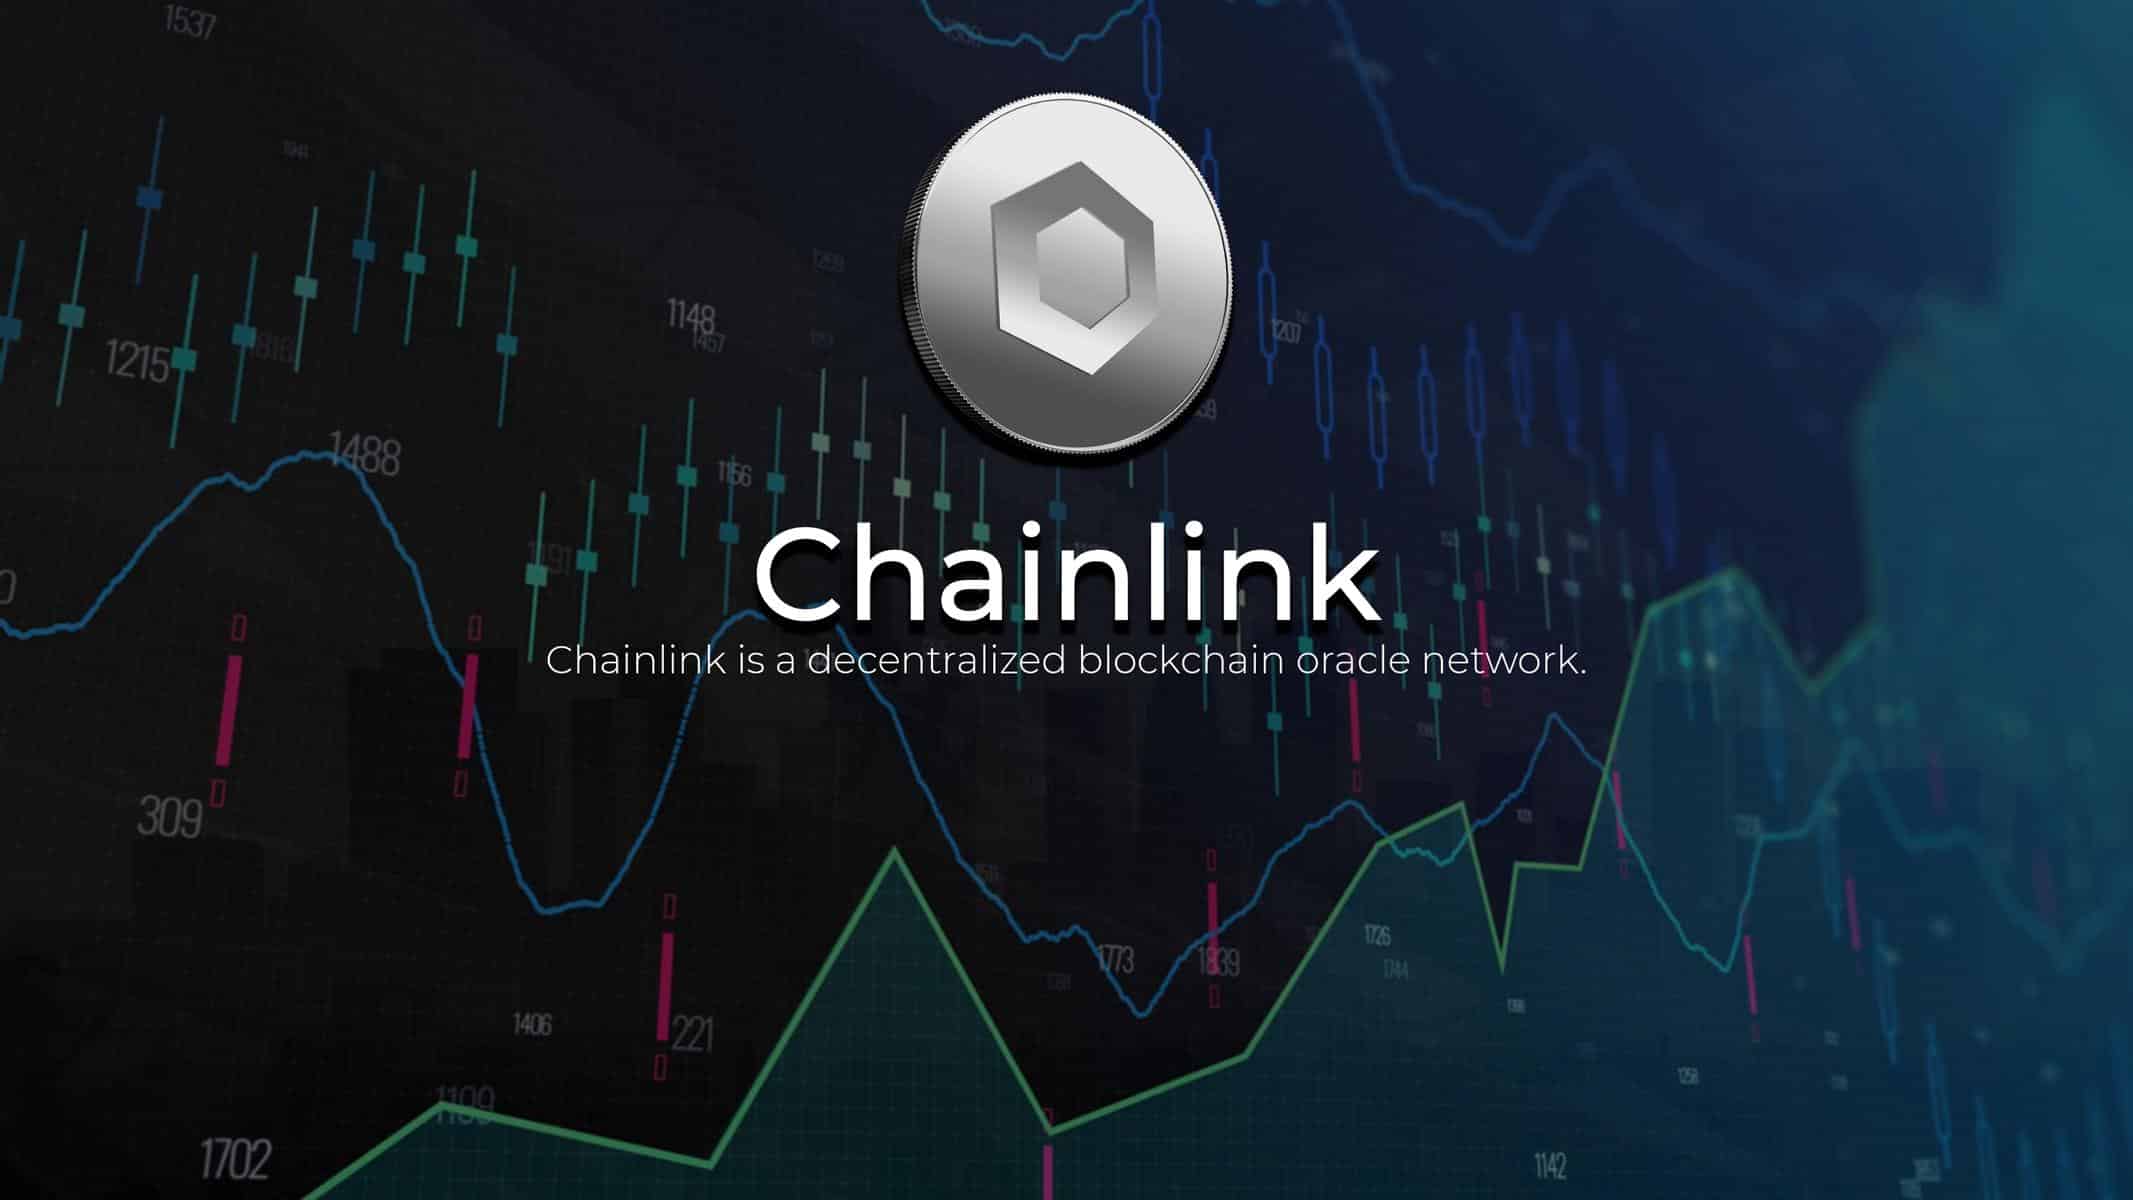 Real Estate Meets Blockchain: PropyKeys Integrates Chainlink Automation for Staking Rewards